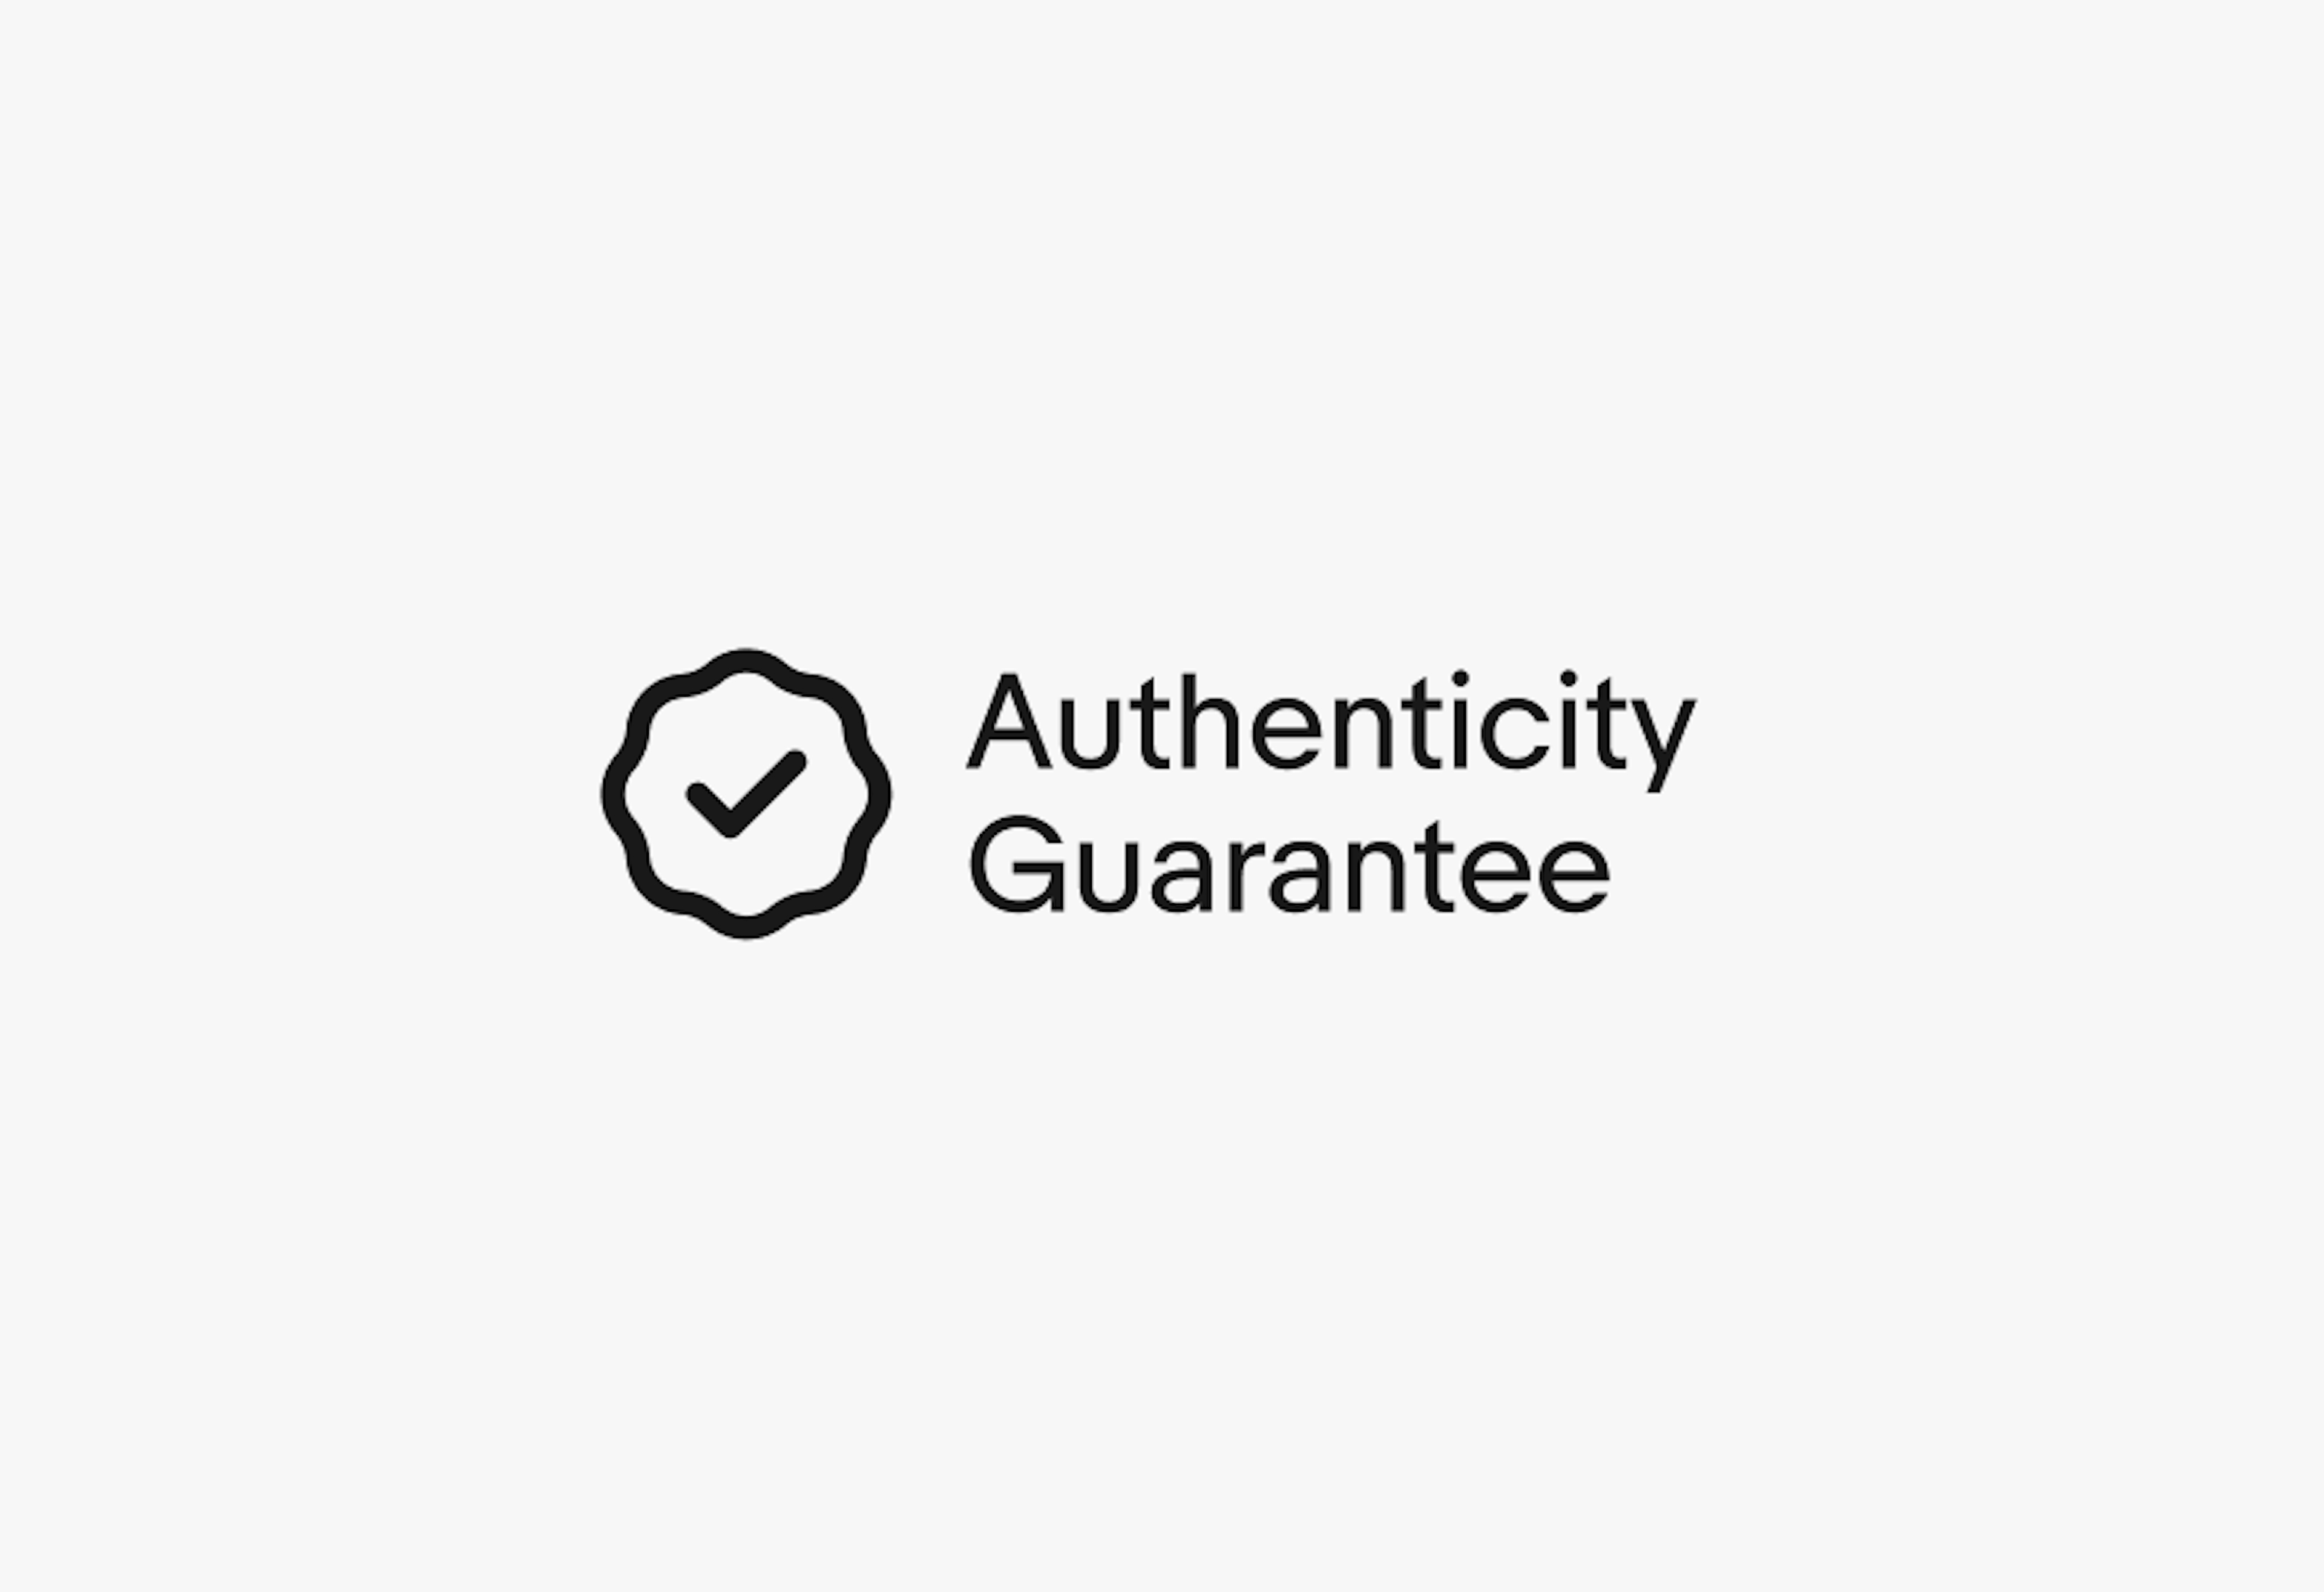 A rosette checkmark icon next to a double line of text. “Authenticity” is on the first line and “Guarantee” on the second.